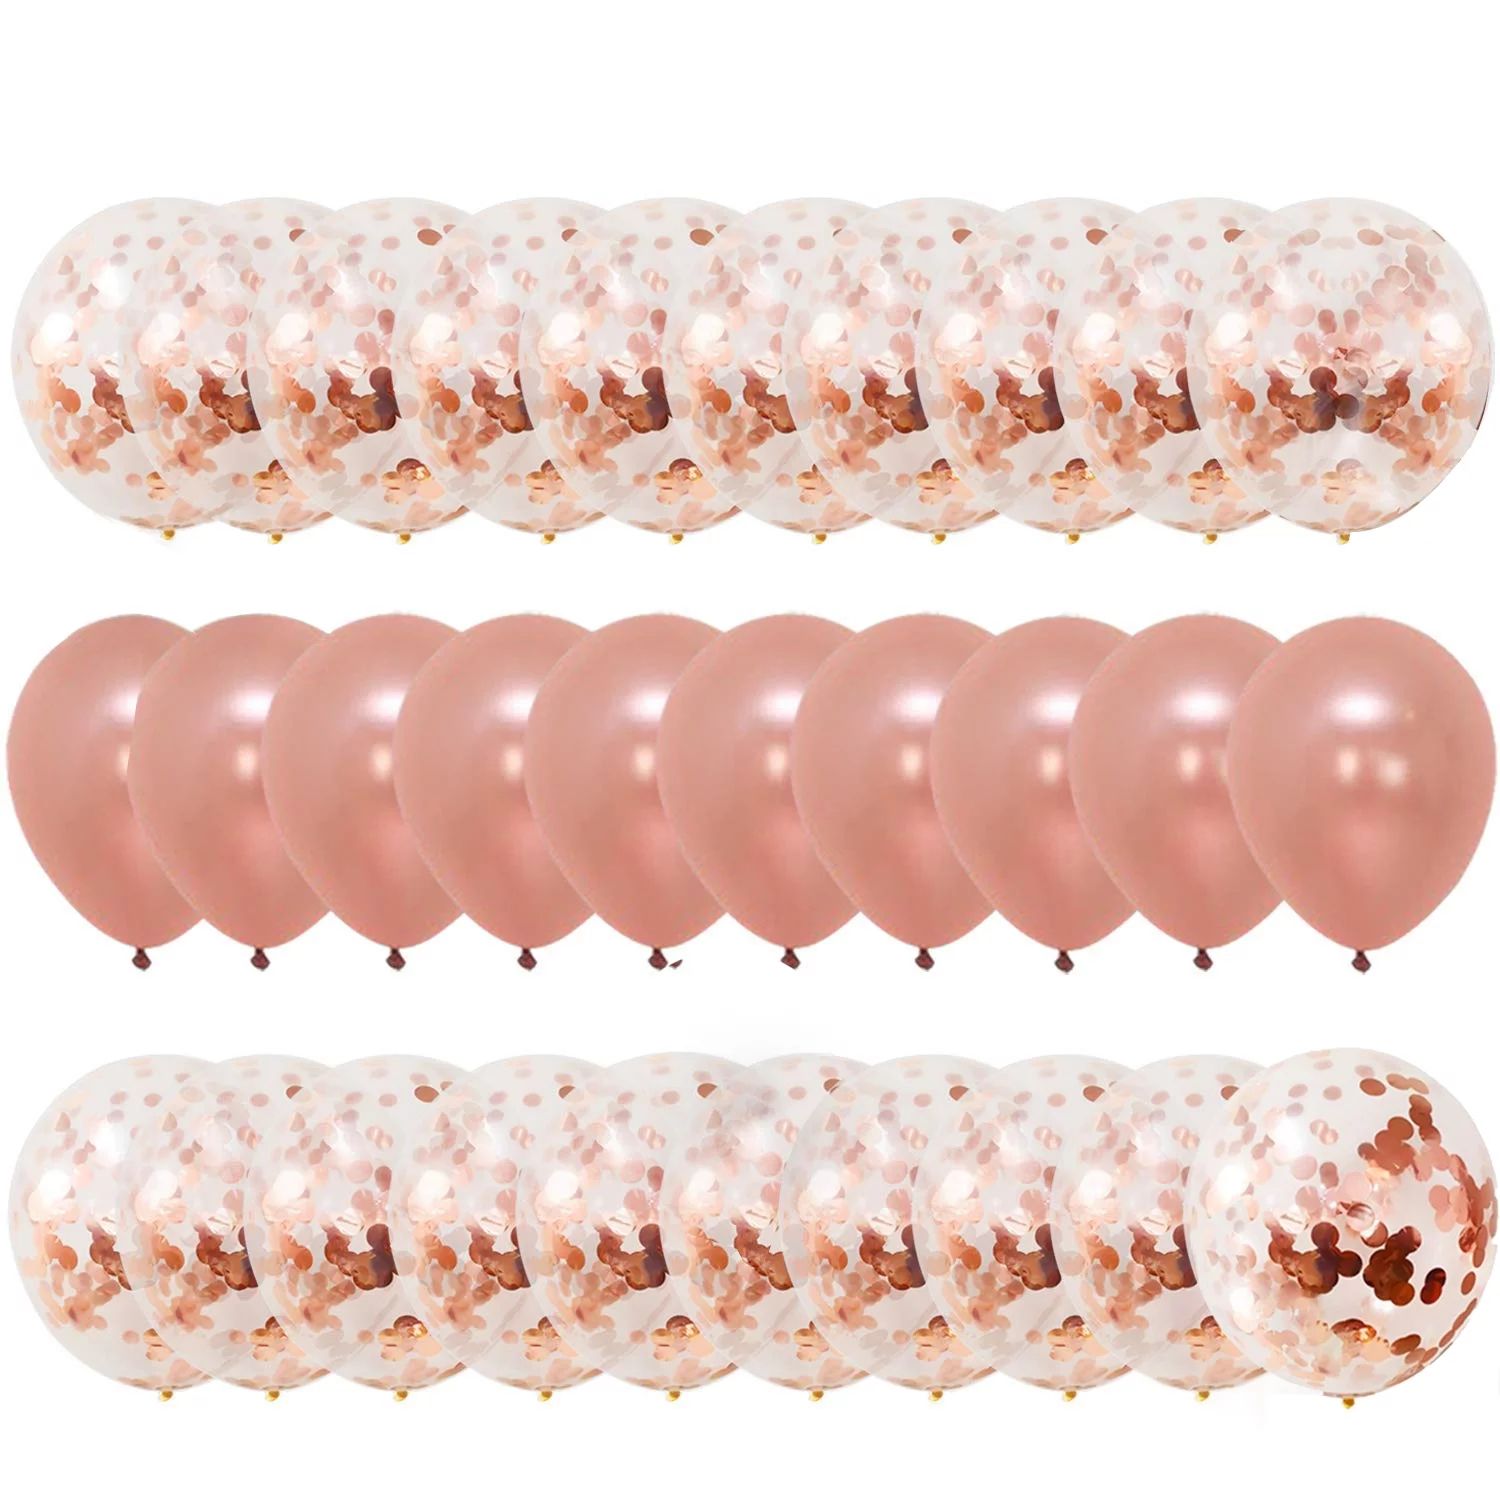 Rose Gold, Confetti and Blush Pink Balloons – Pack of 30, Great for Bridal Shower Decorations, ... | Walmart (US)